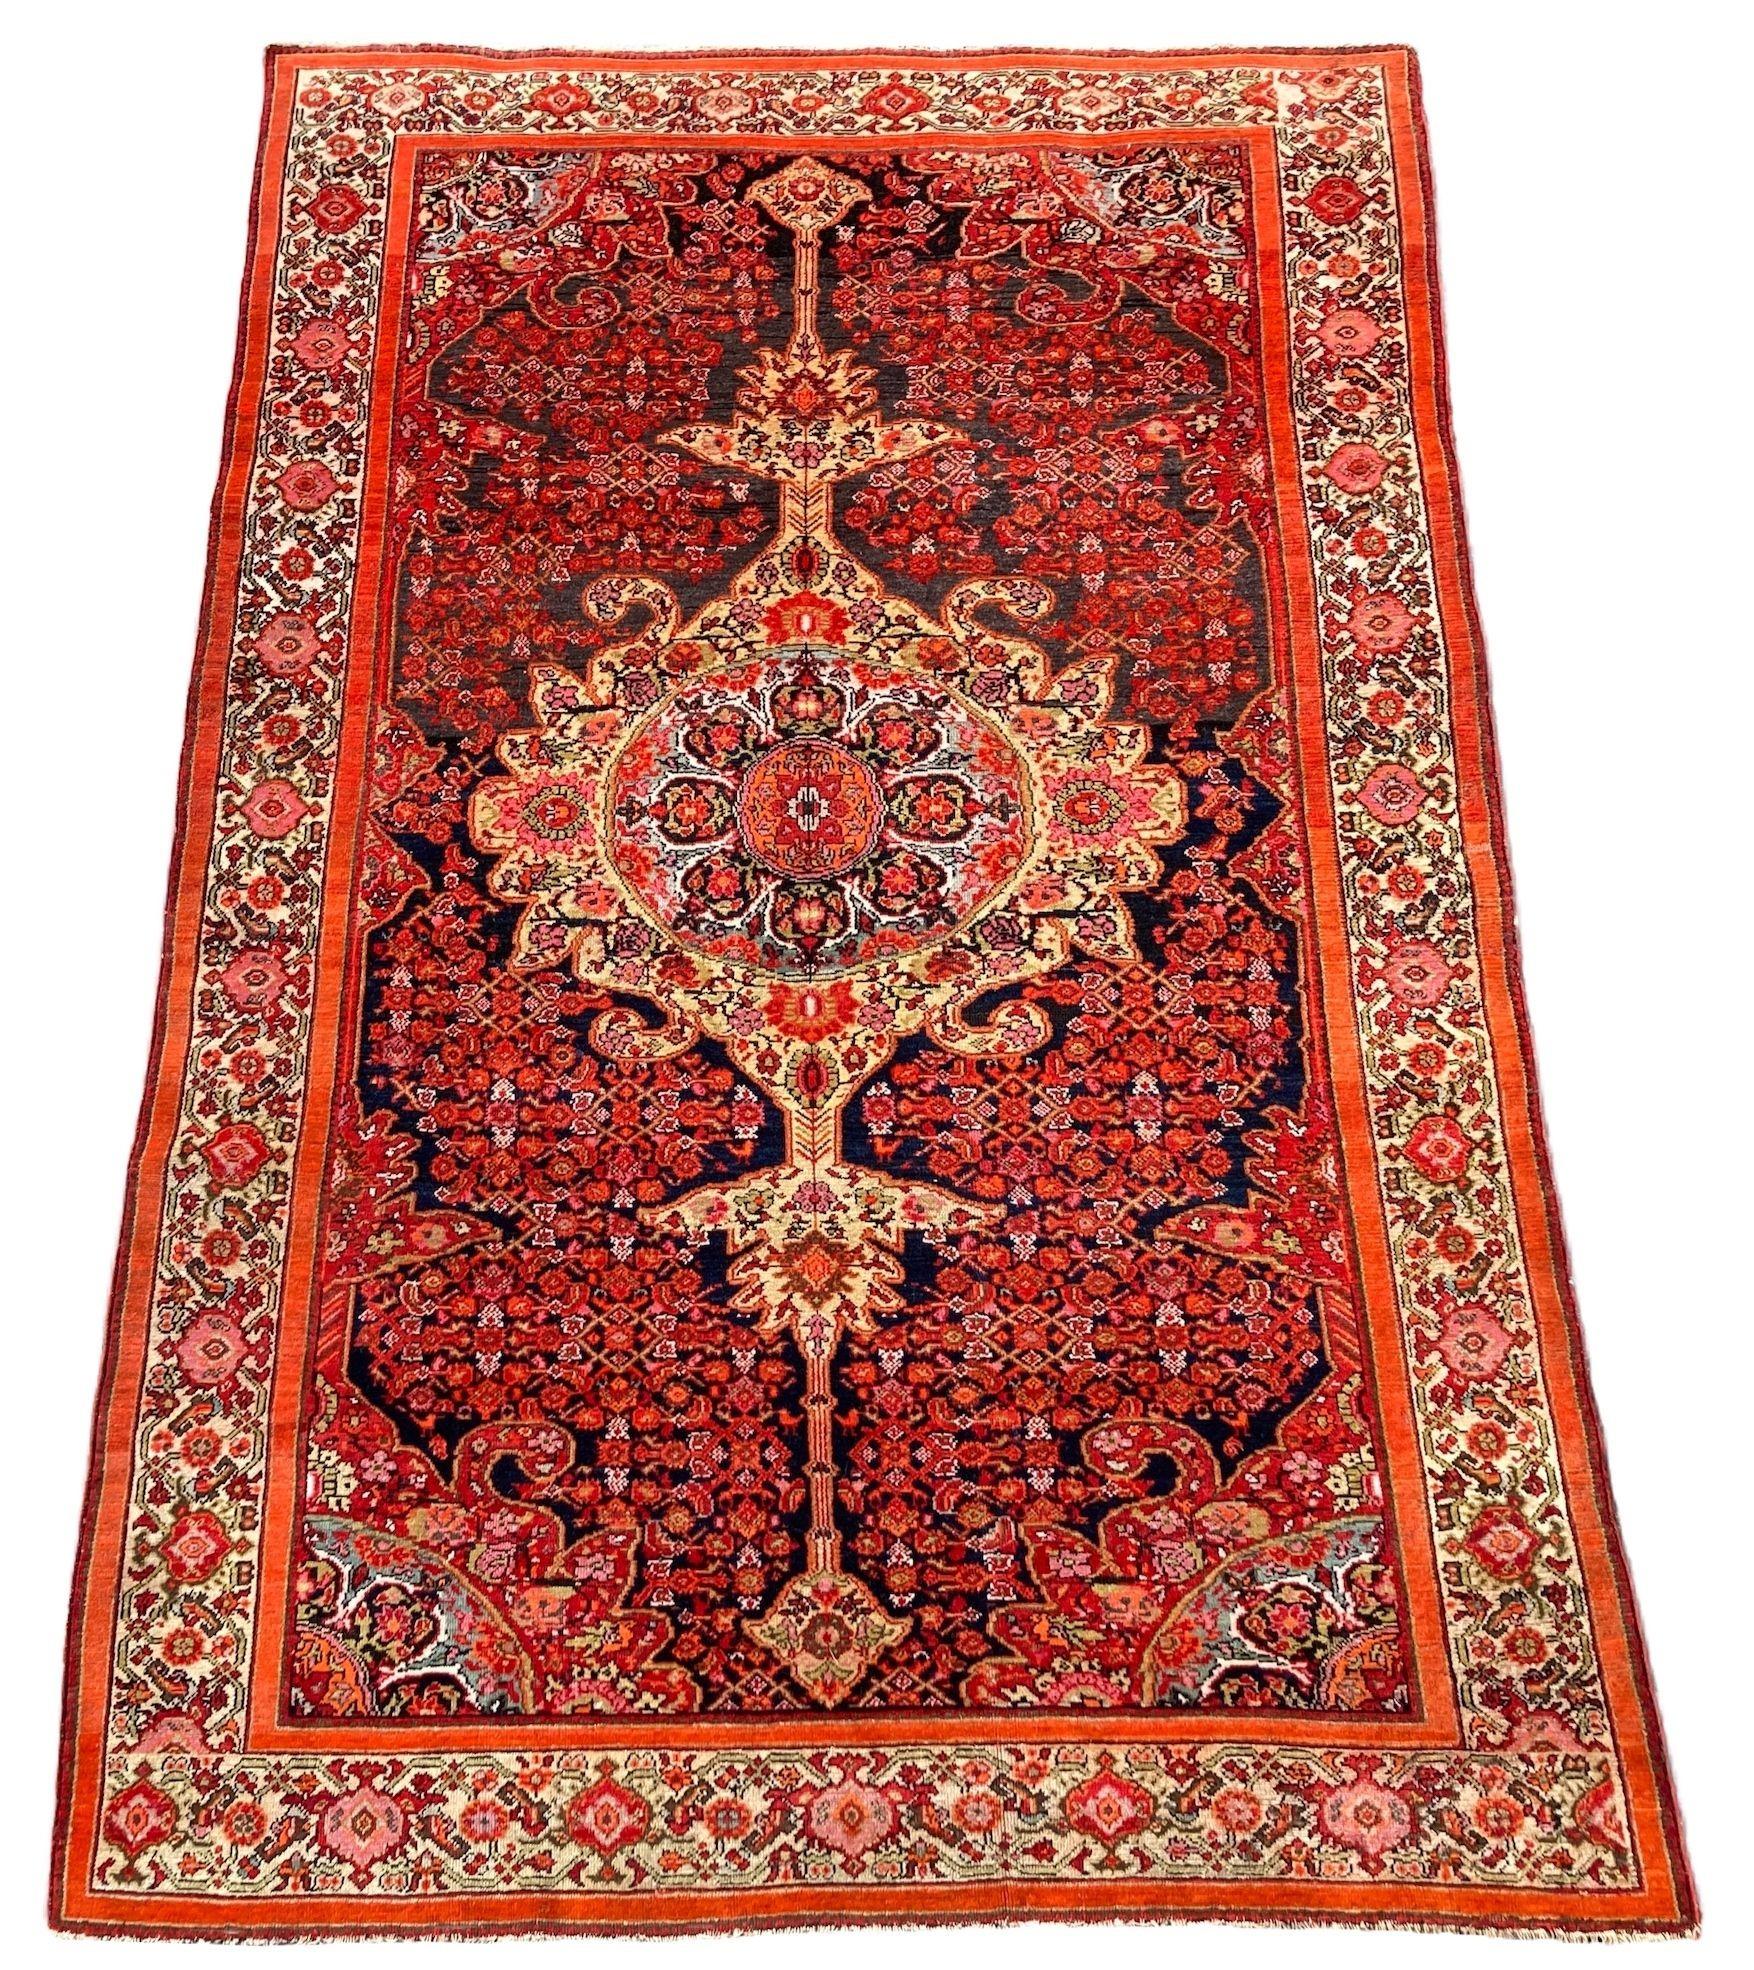 A fabulous antique Malayer rug, handwoven circa 1900 with an intricate floral medallion on a rich, abrasched indigo field and attractive ivory border. Finely woven with lovely wool quality and great colours.
Size: 2.06m x 1.40m (6ft 9in x 4ft